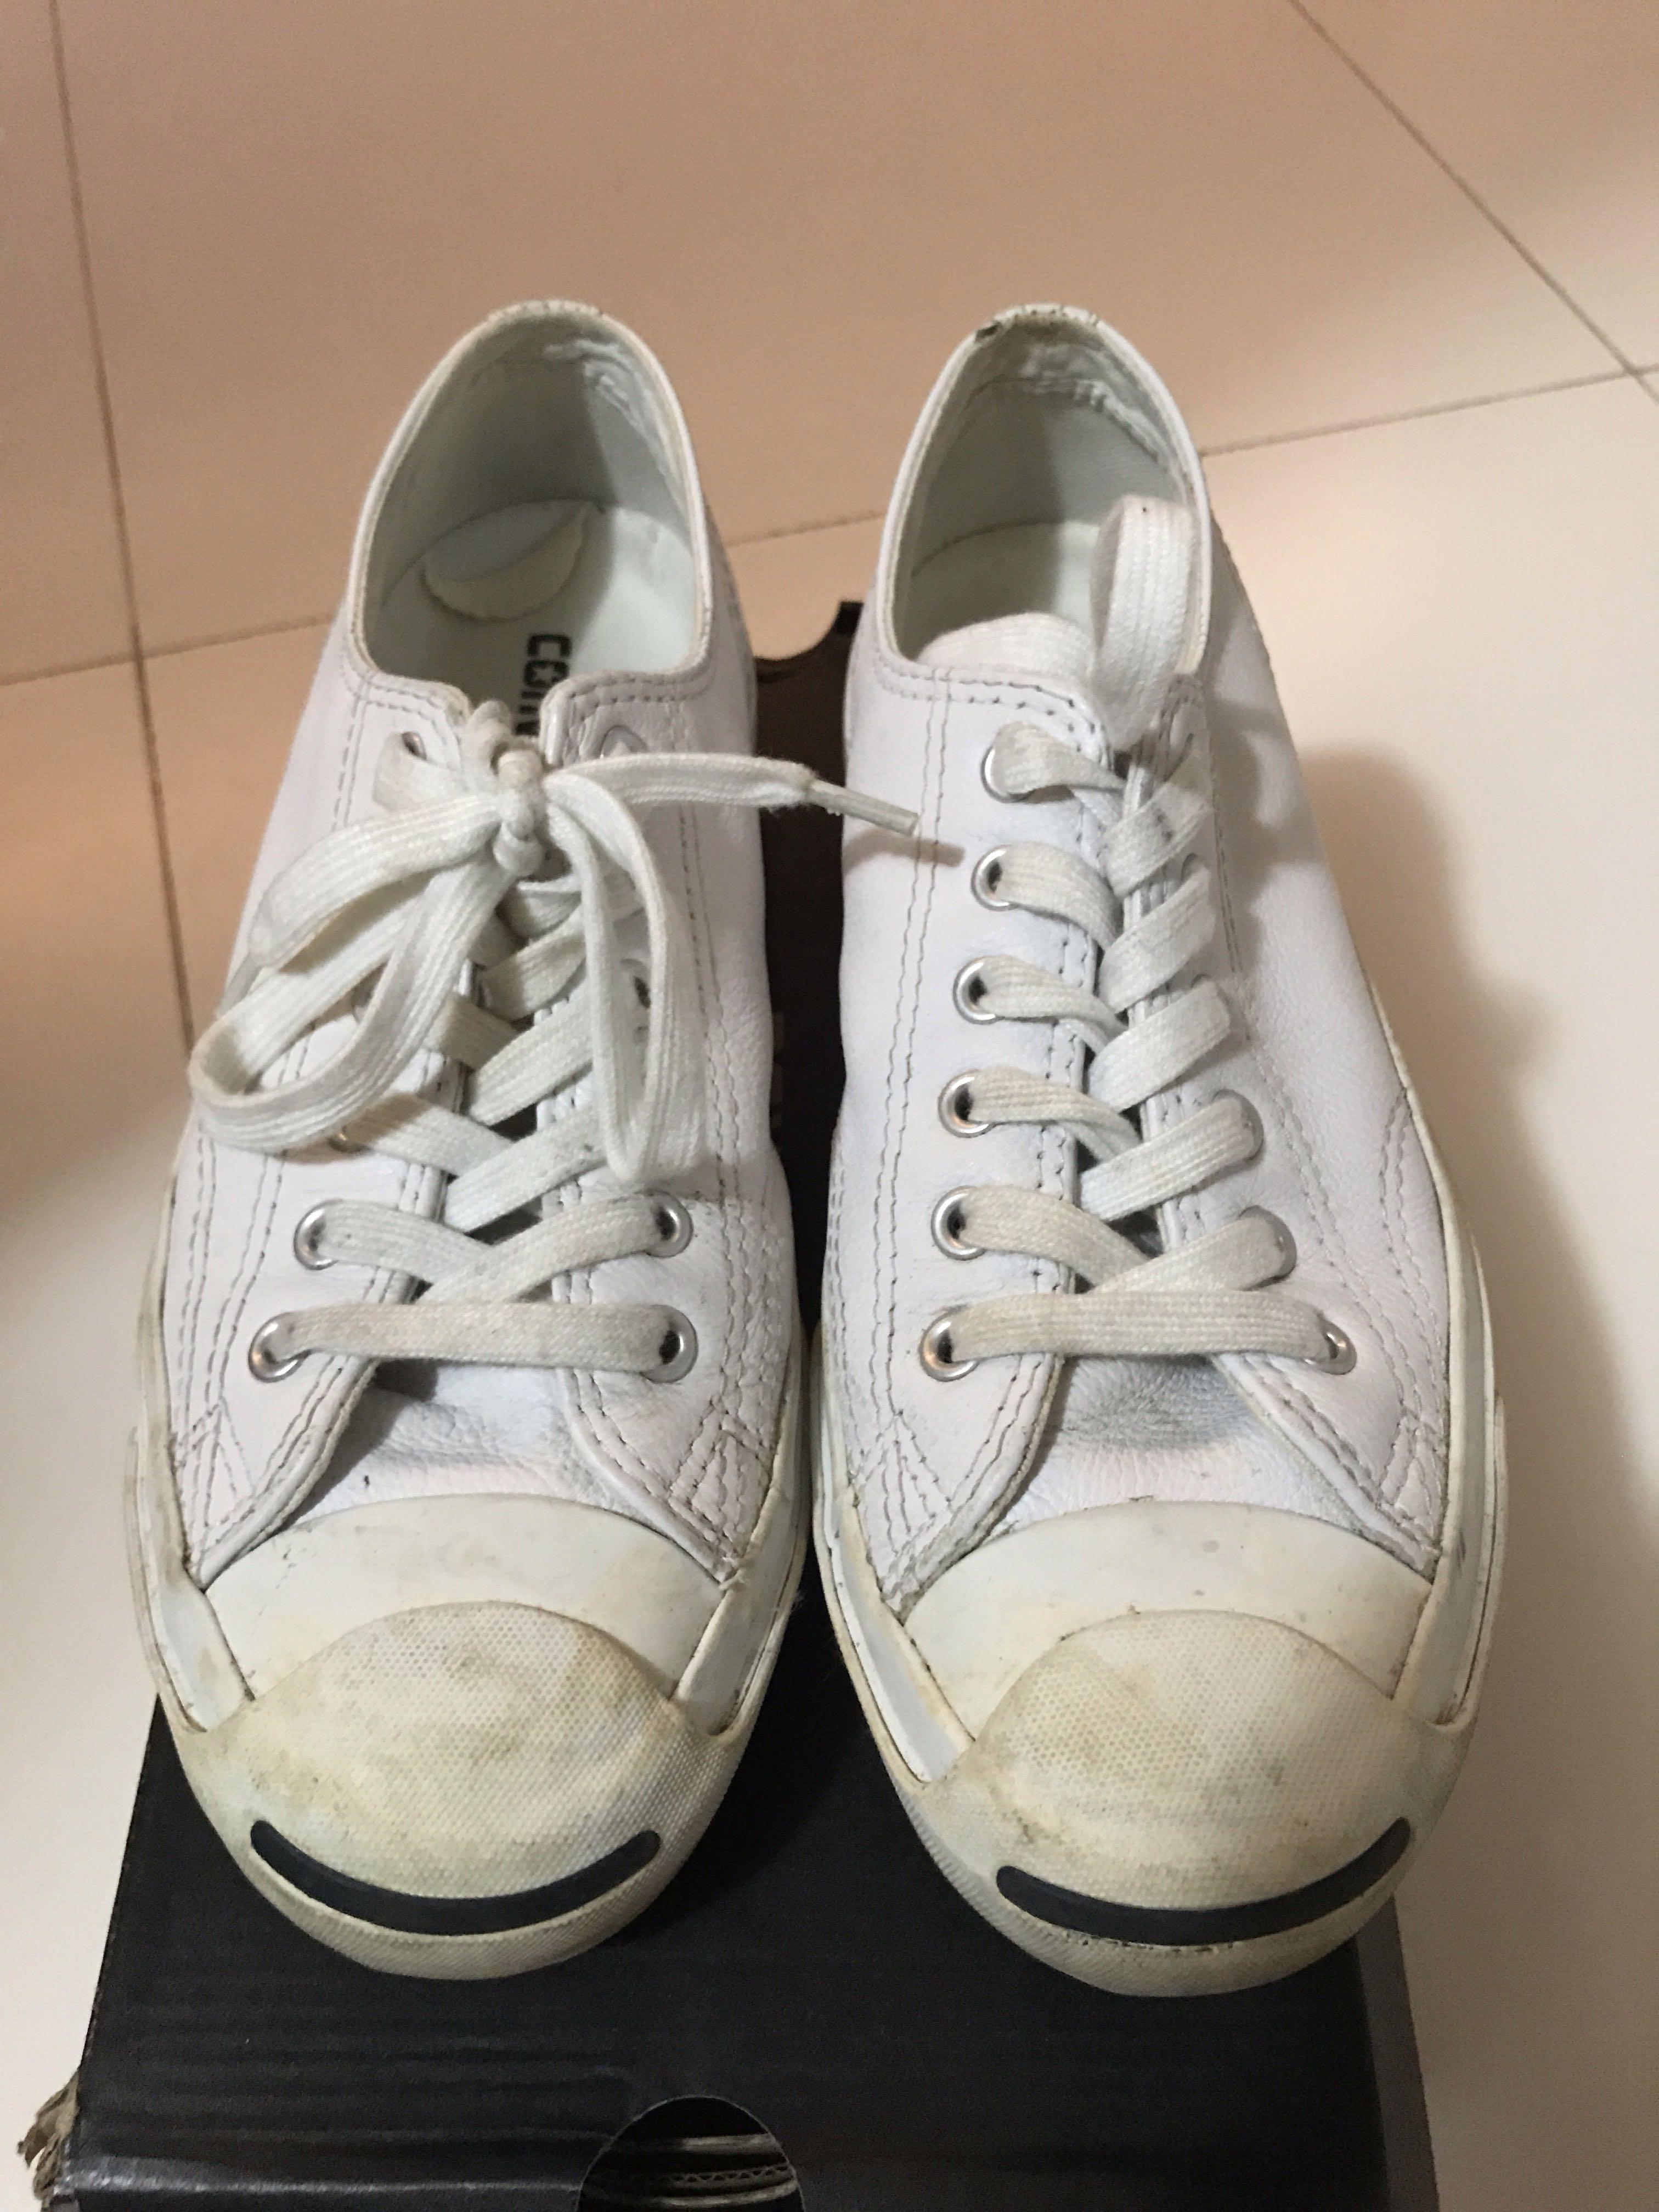 converse jack purcell white uk